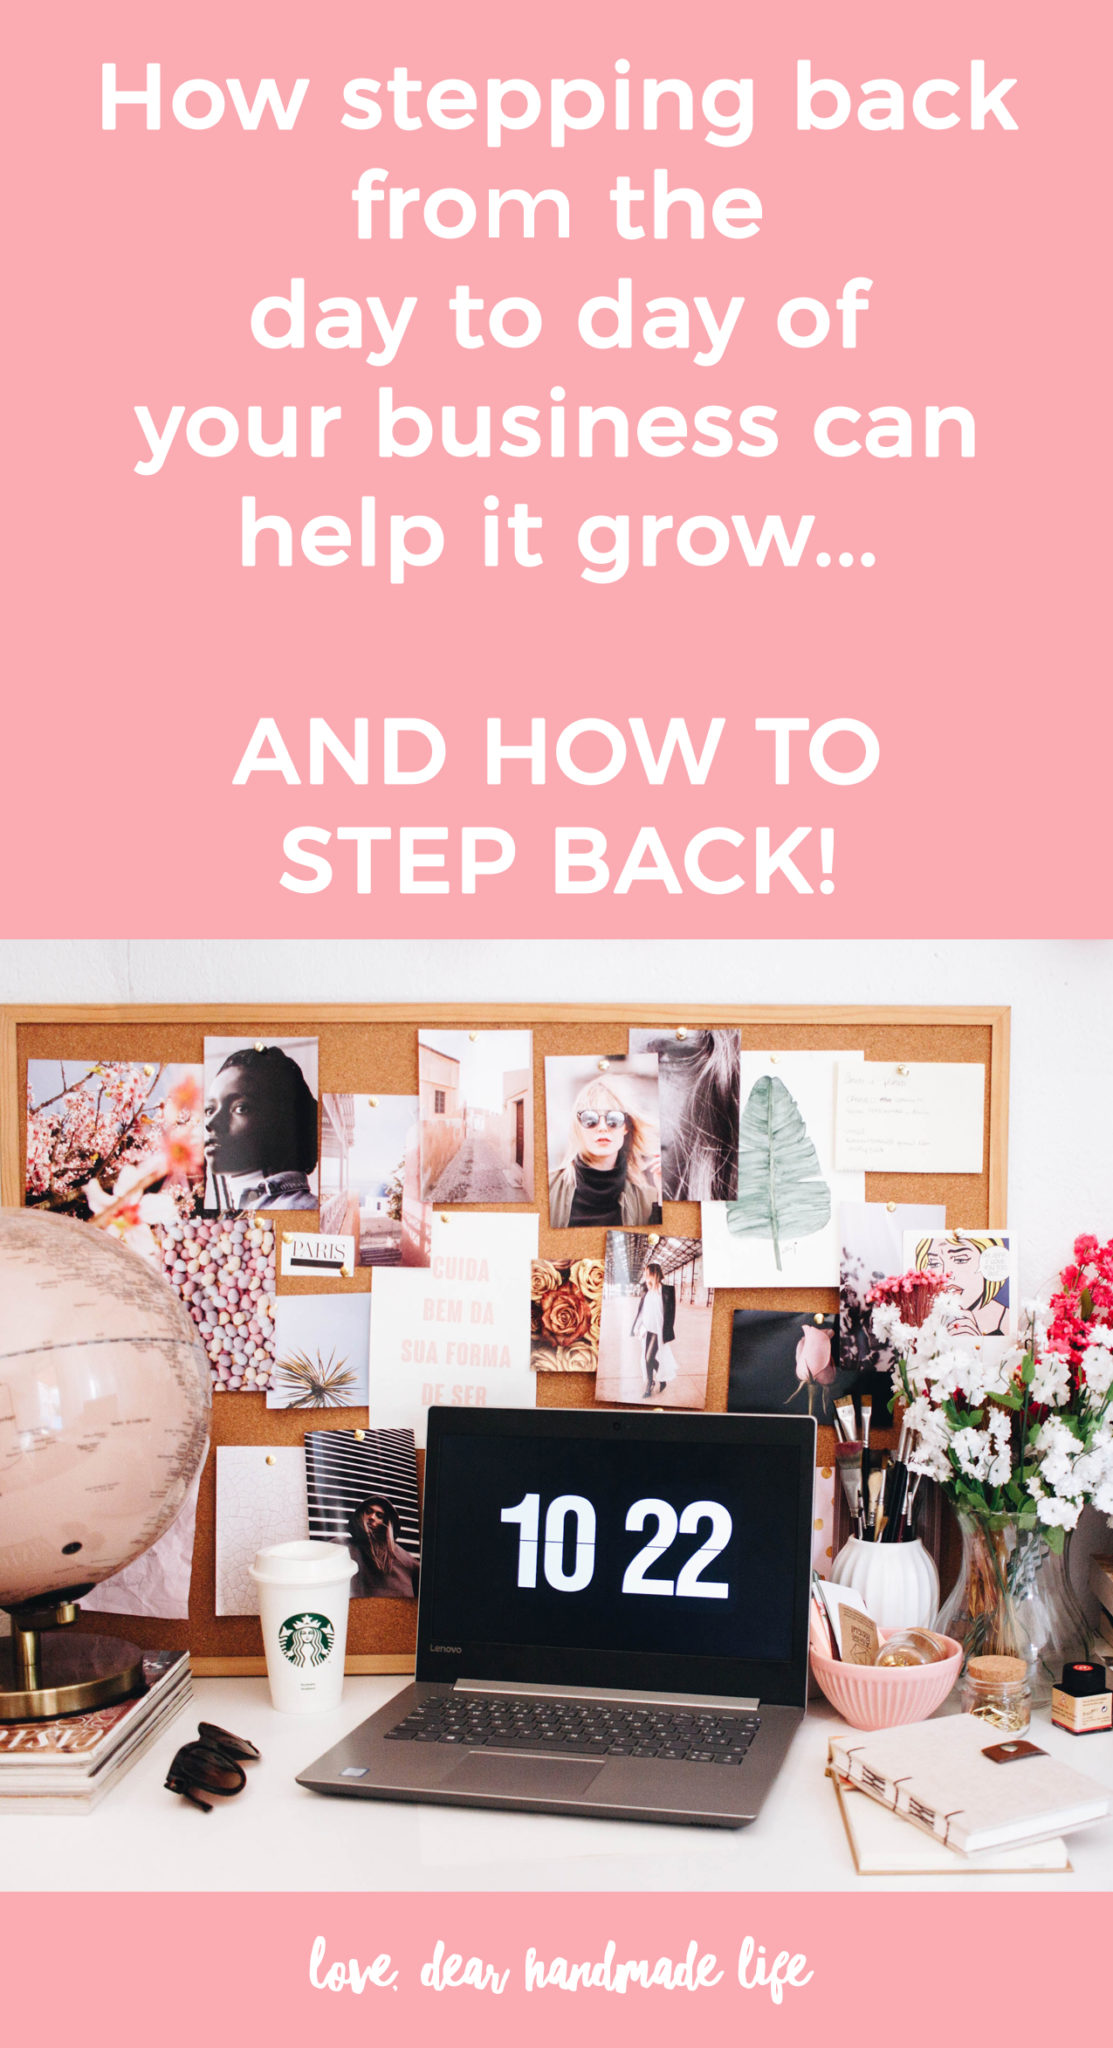 How stepping back from the day to day of your business can help it grow and how to step back Dear Handmade Life